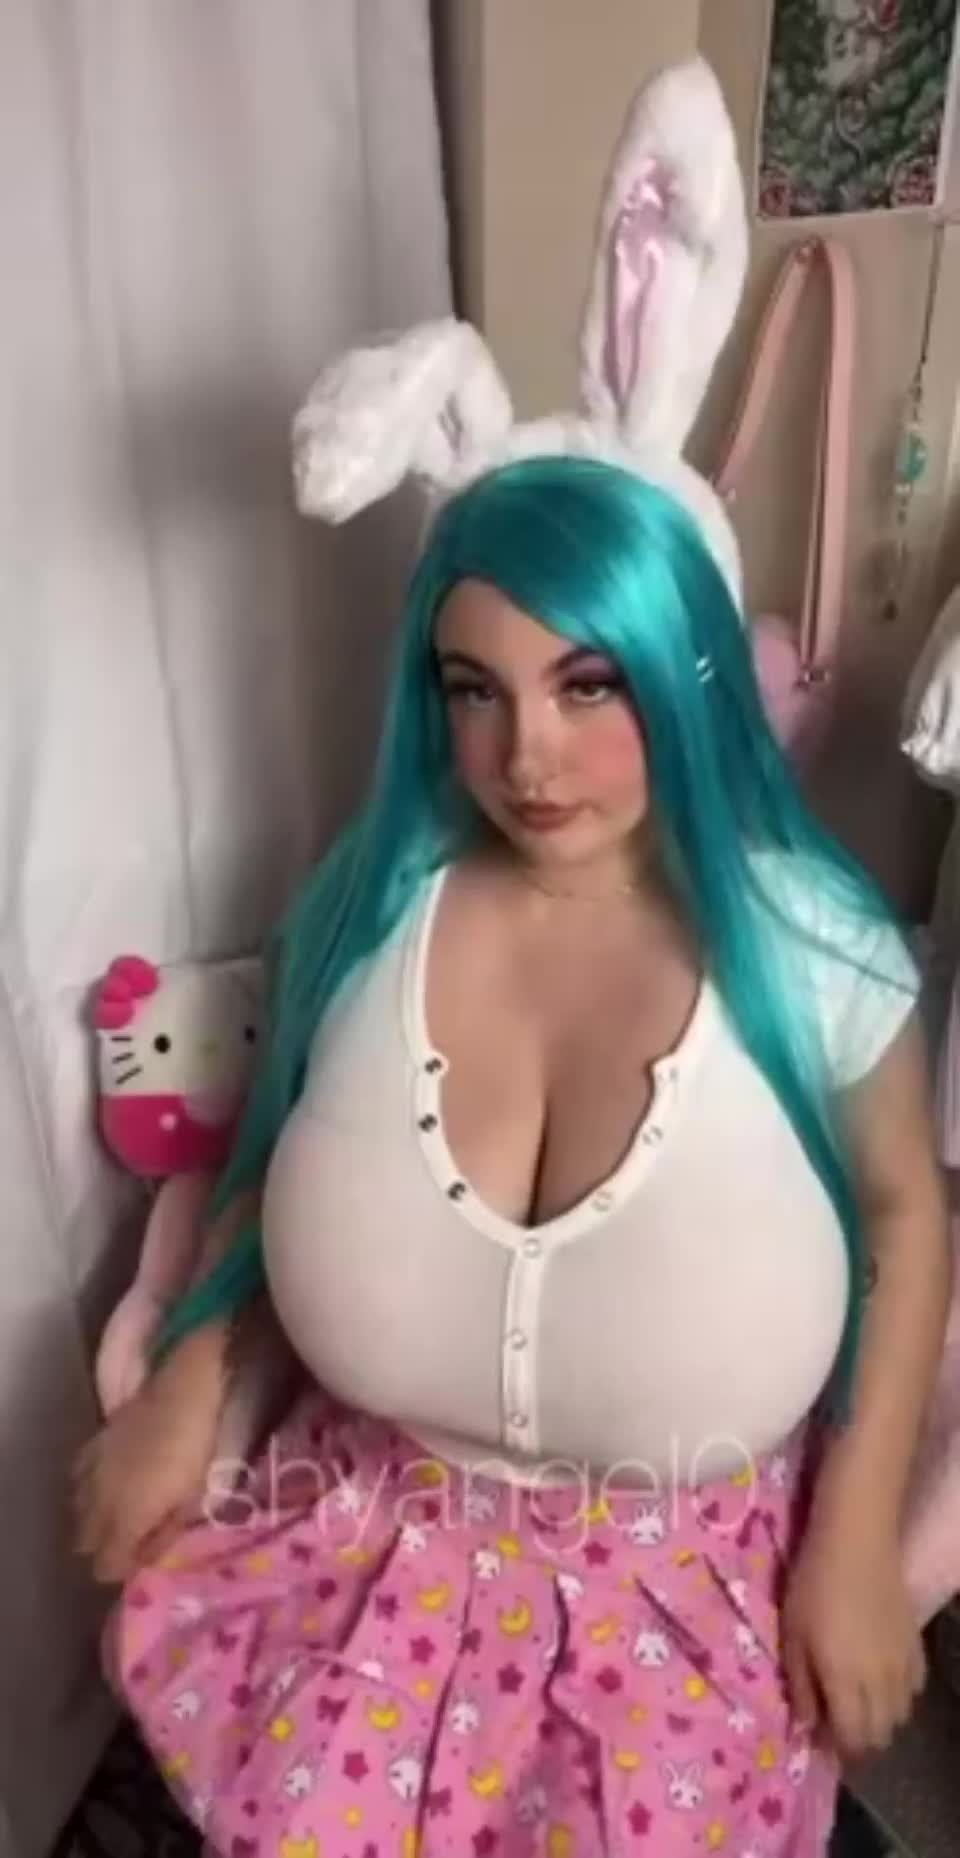 Video post by BigTitsParadise